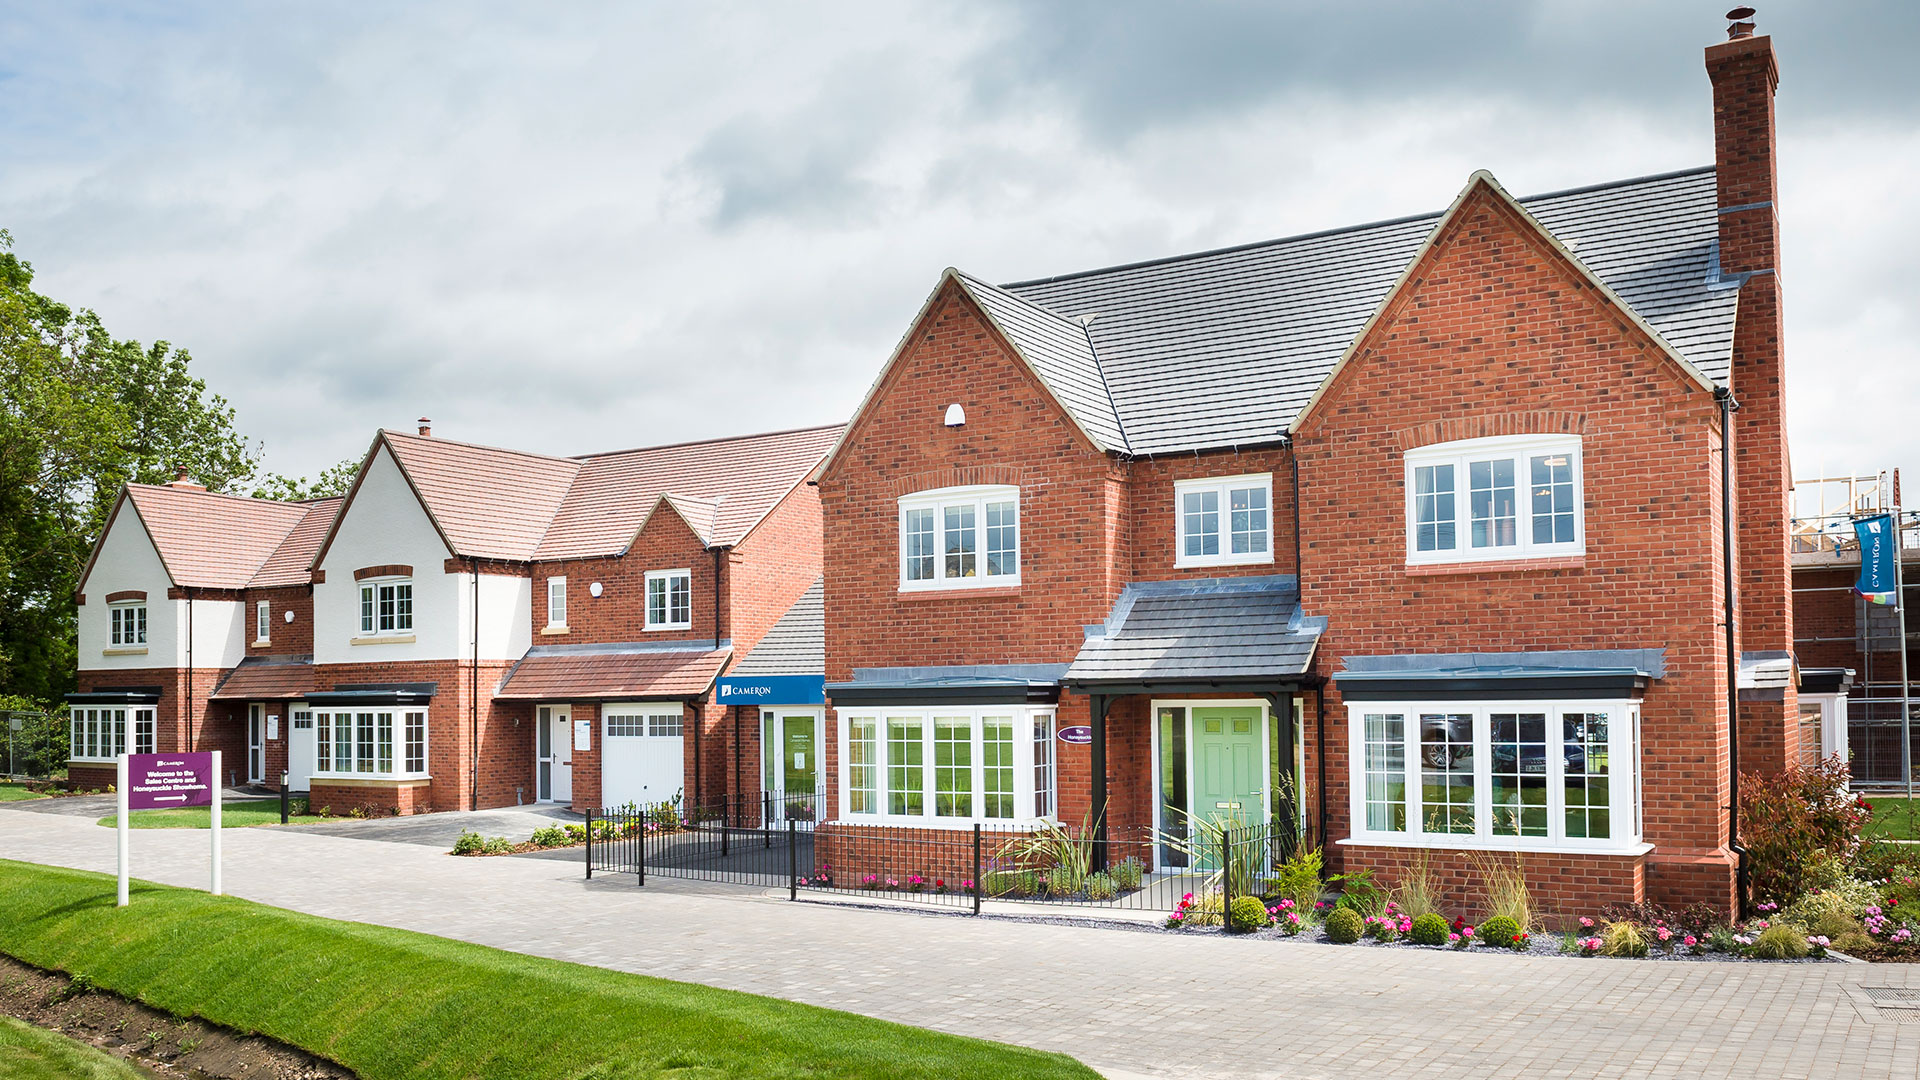 Building for the Future: Cameron Homes’ Data Transformation Journey